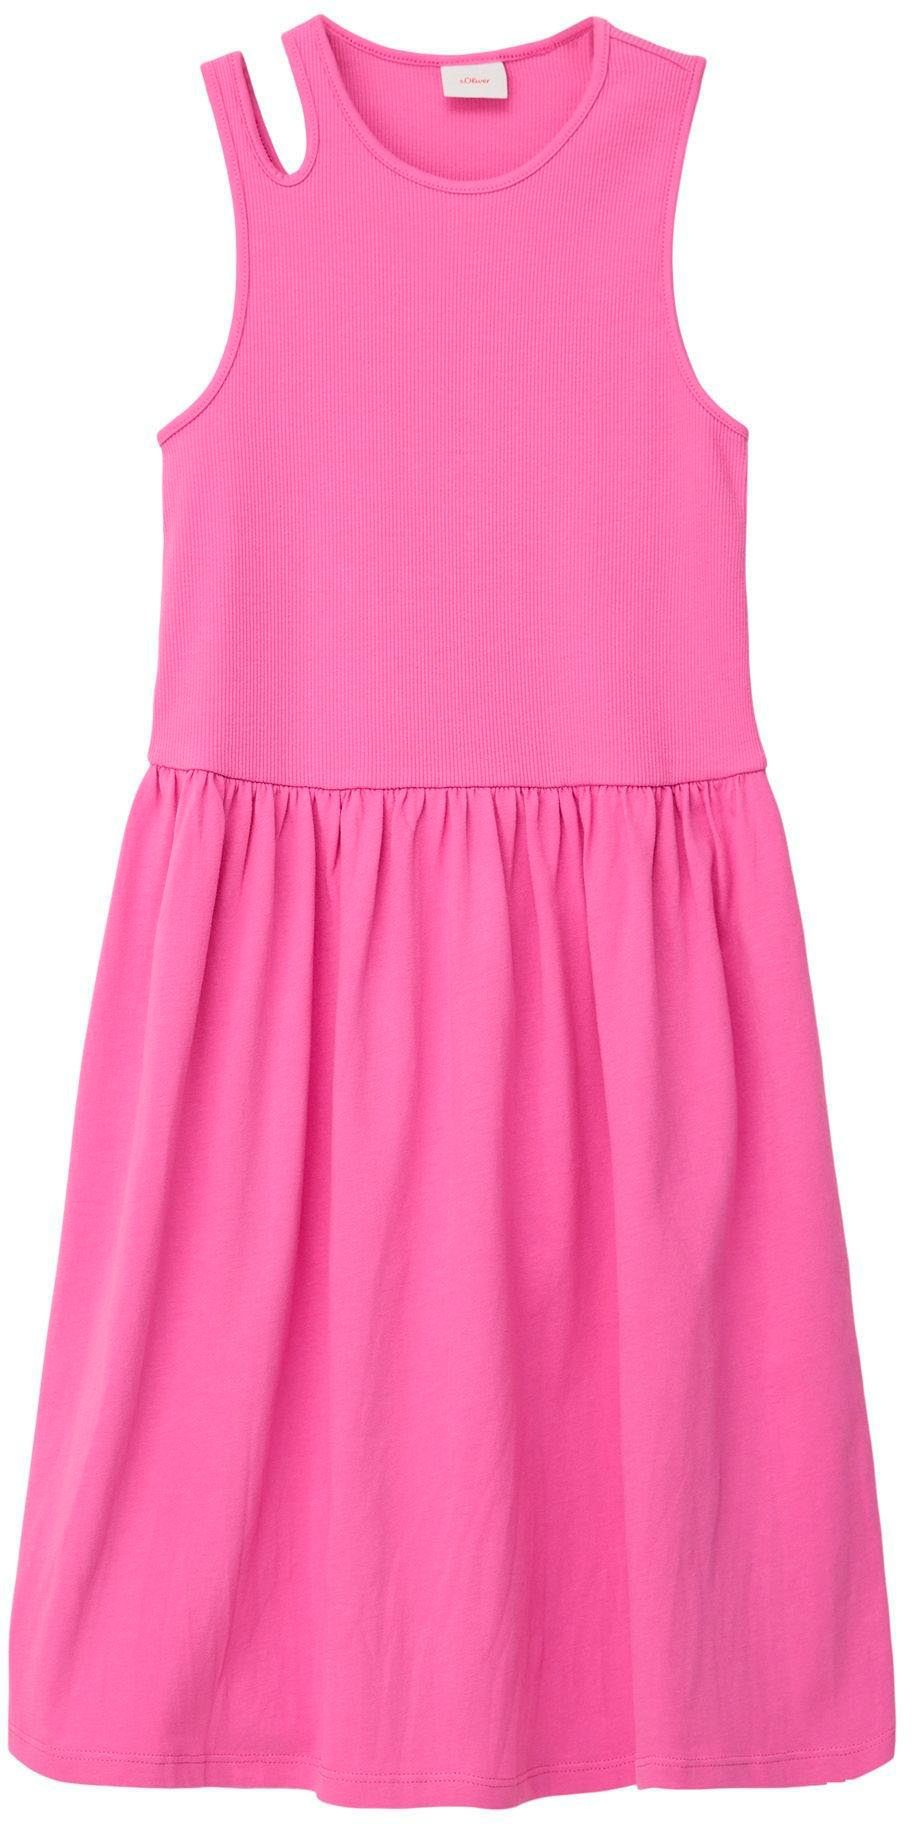 Cut-out Junior Minikleid lilac/pink s.Oliver mit